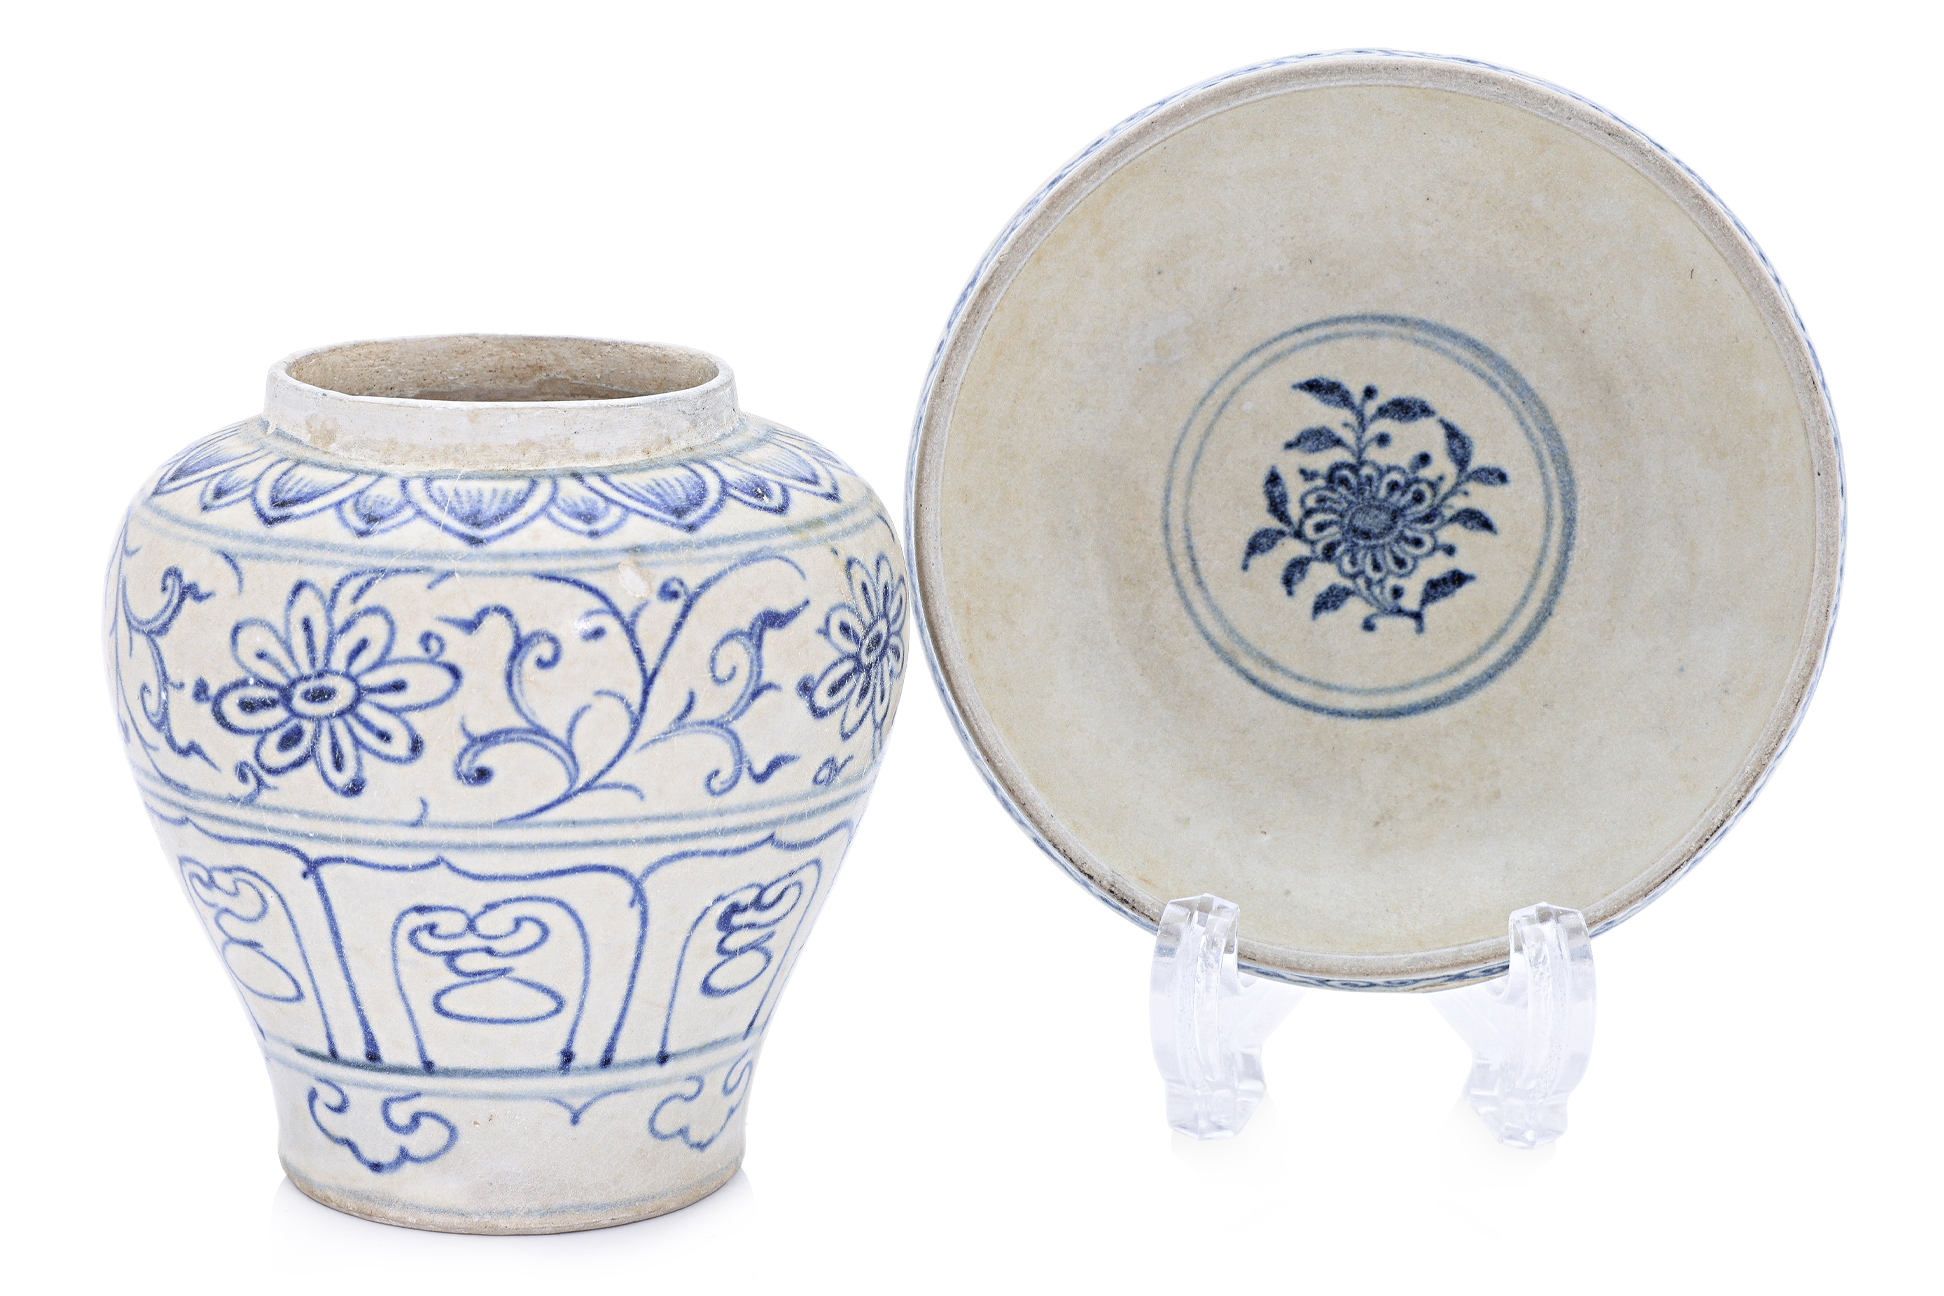 A SMALL VIETNAMESE BLUE AND WHITE JAR AND DISH